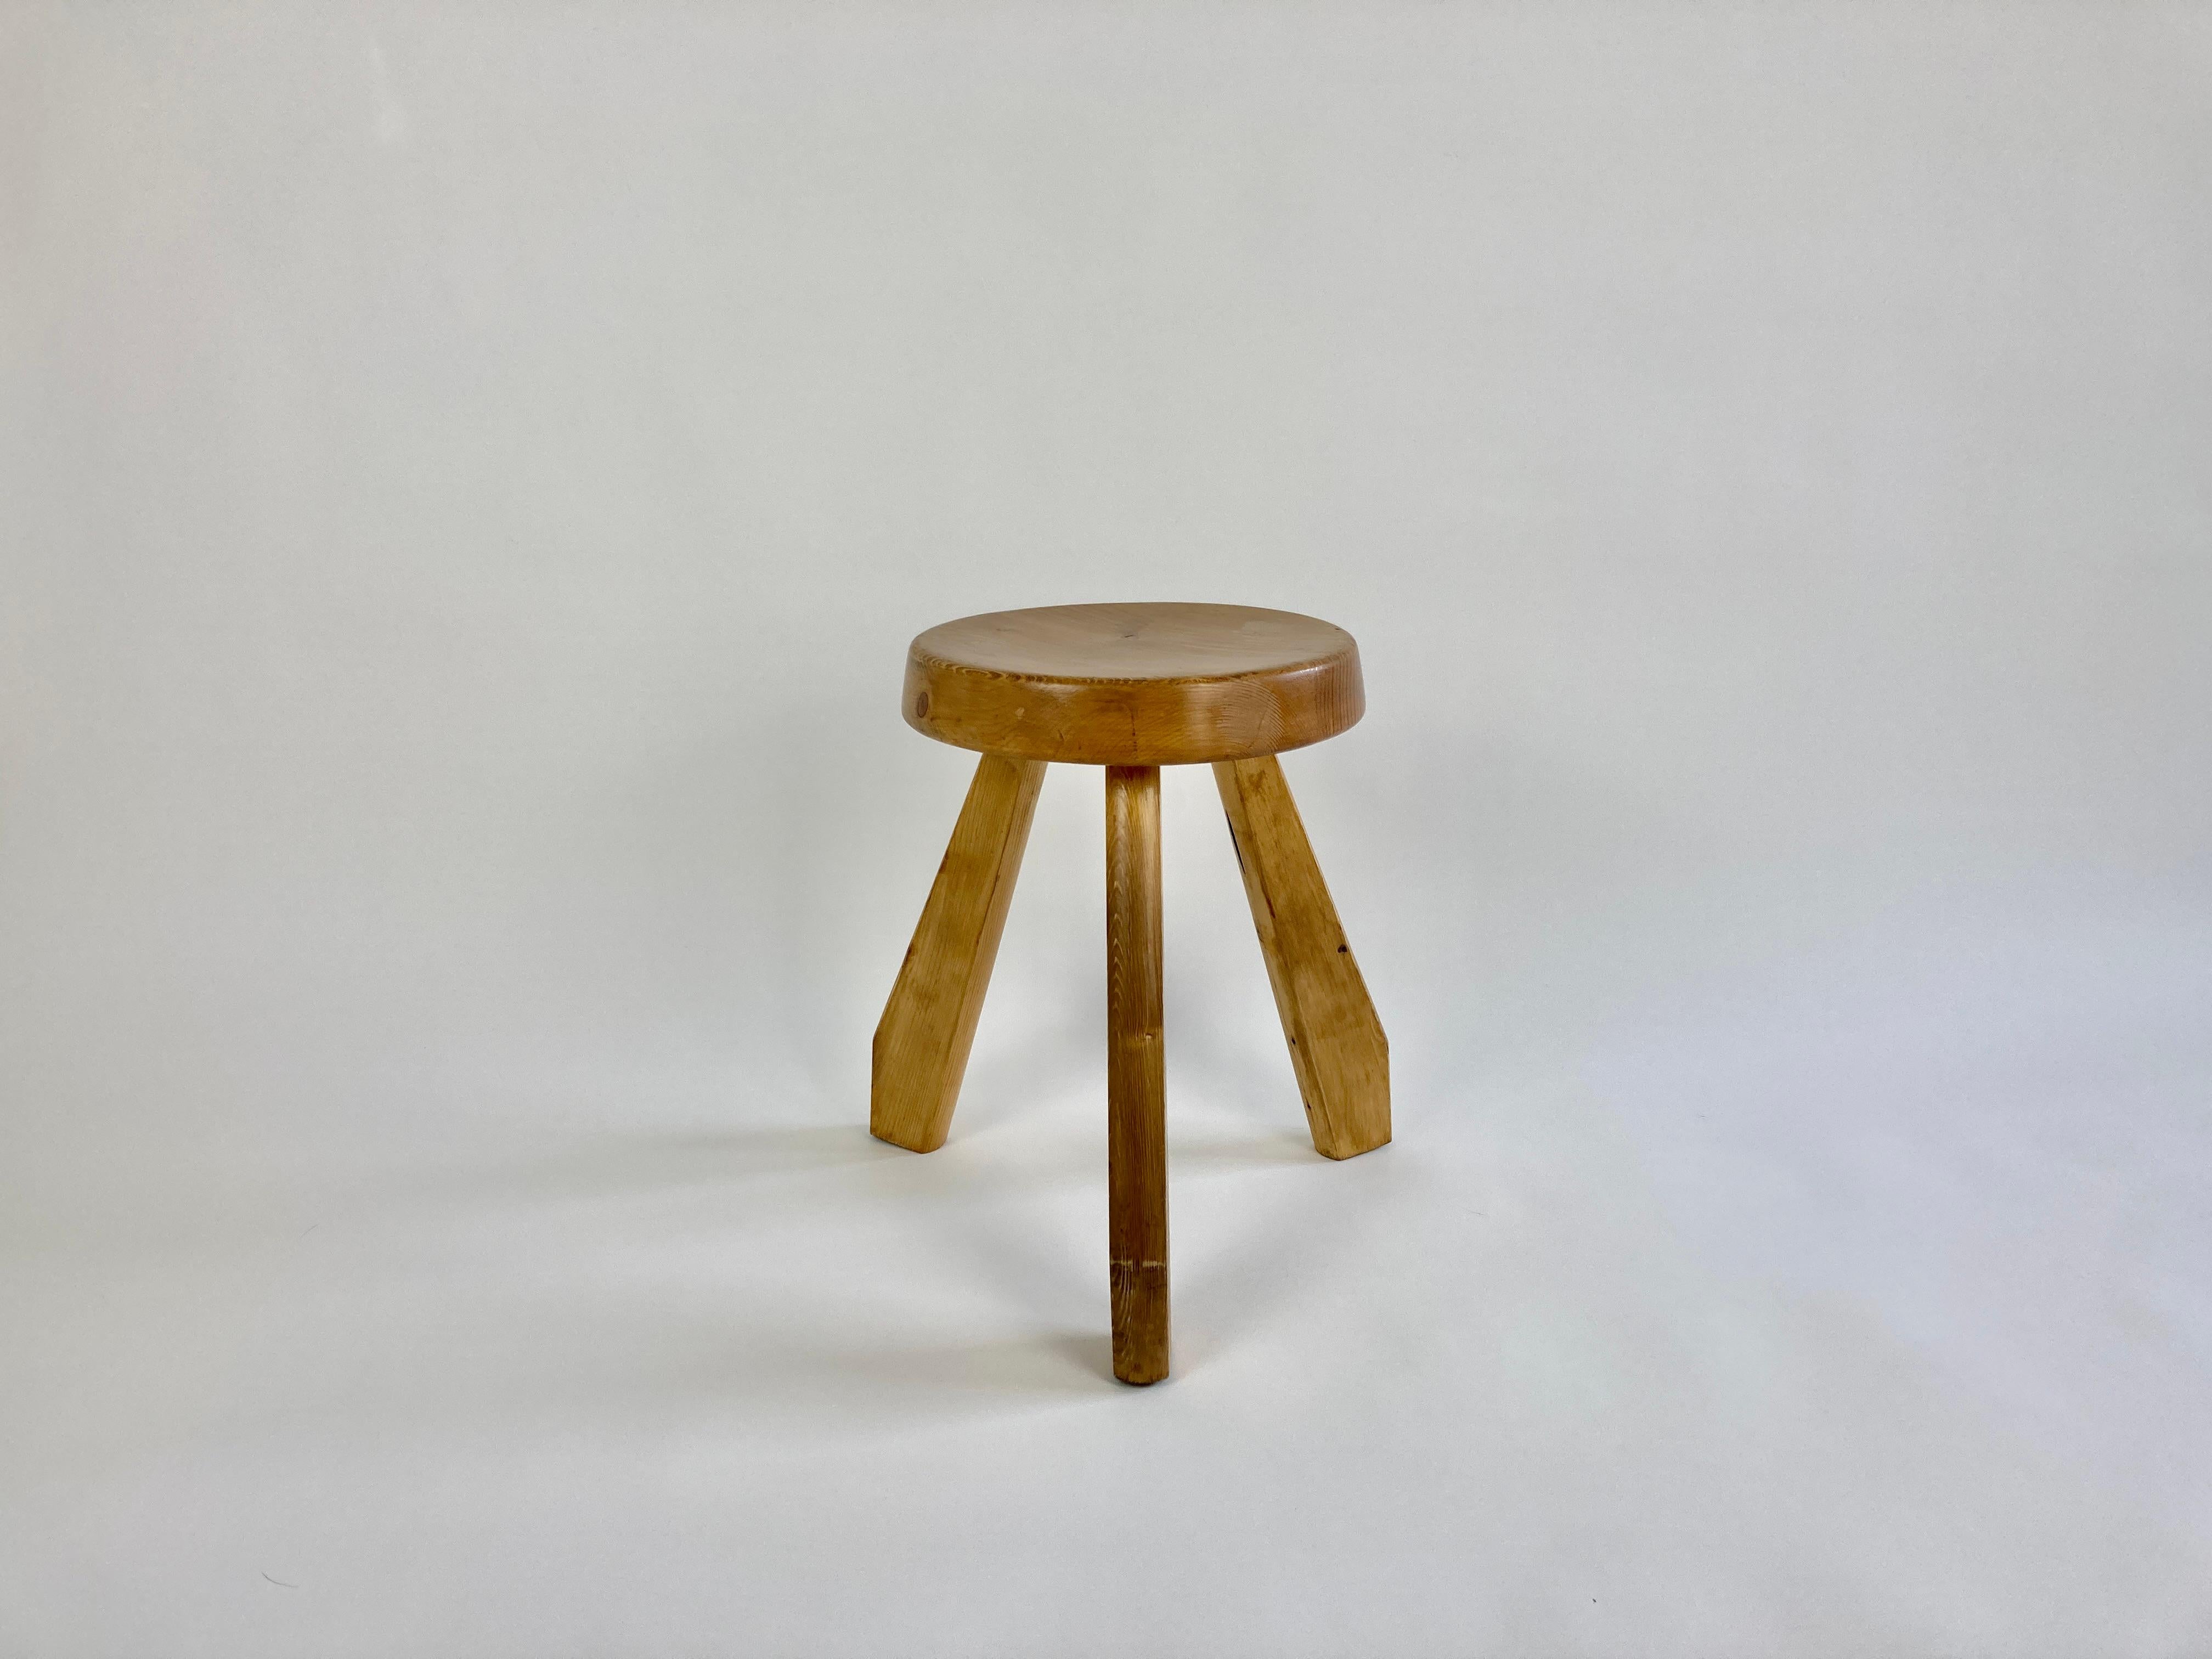 Rare pine Sandoz stool by Charlotte Perriand, circa 1960 from Les Arcs.

The stool was sourced from a chalet clearance in the Haute Savoie region of France.

Original condition, with signs of age and use, age related wear as pictured. Structurally